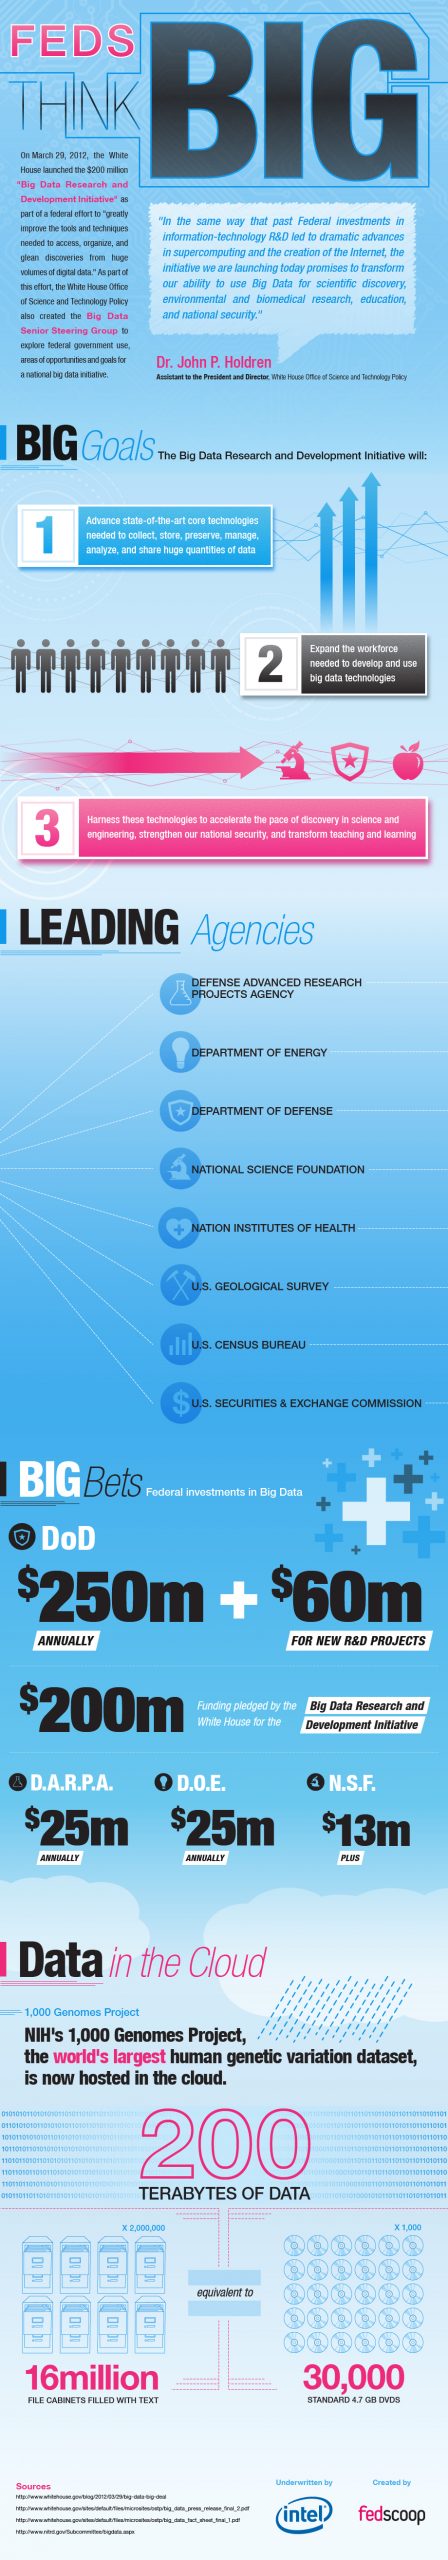 How The USA Federal Government Thinks Big With Data